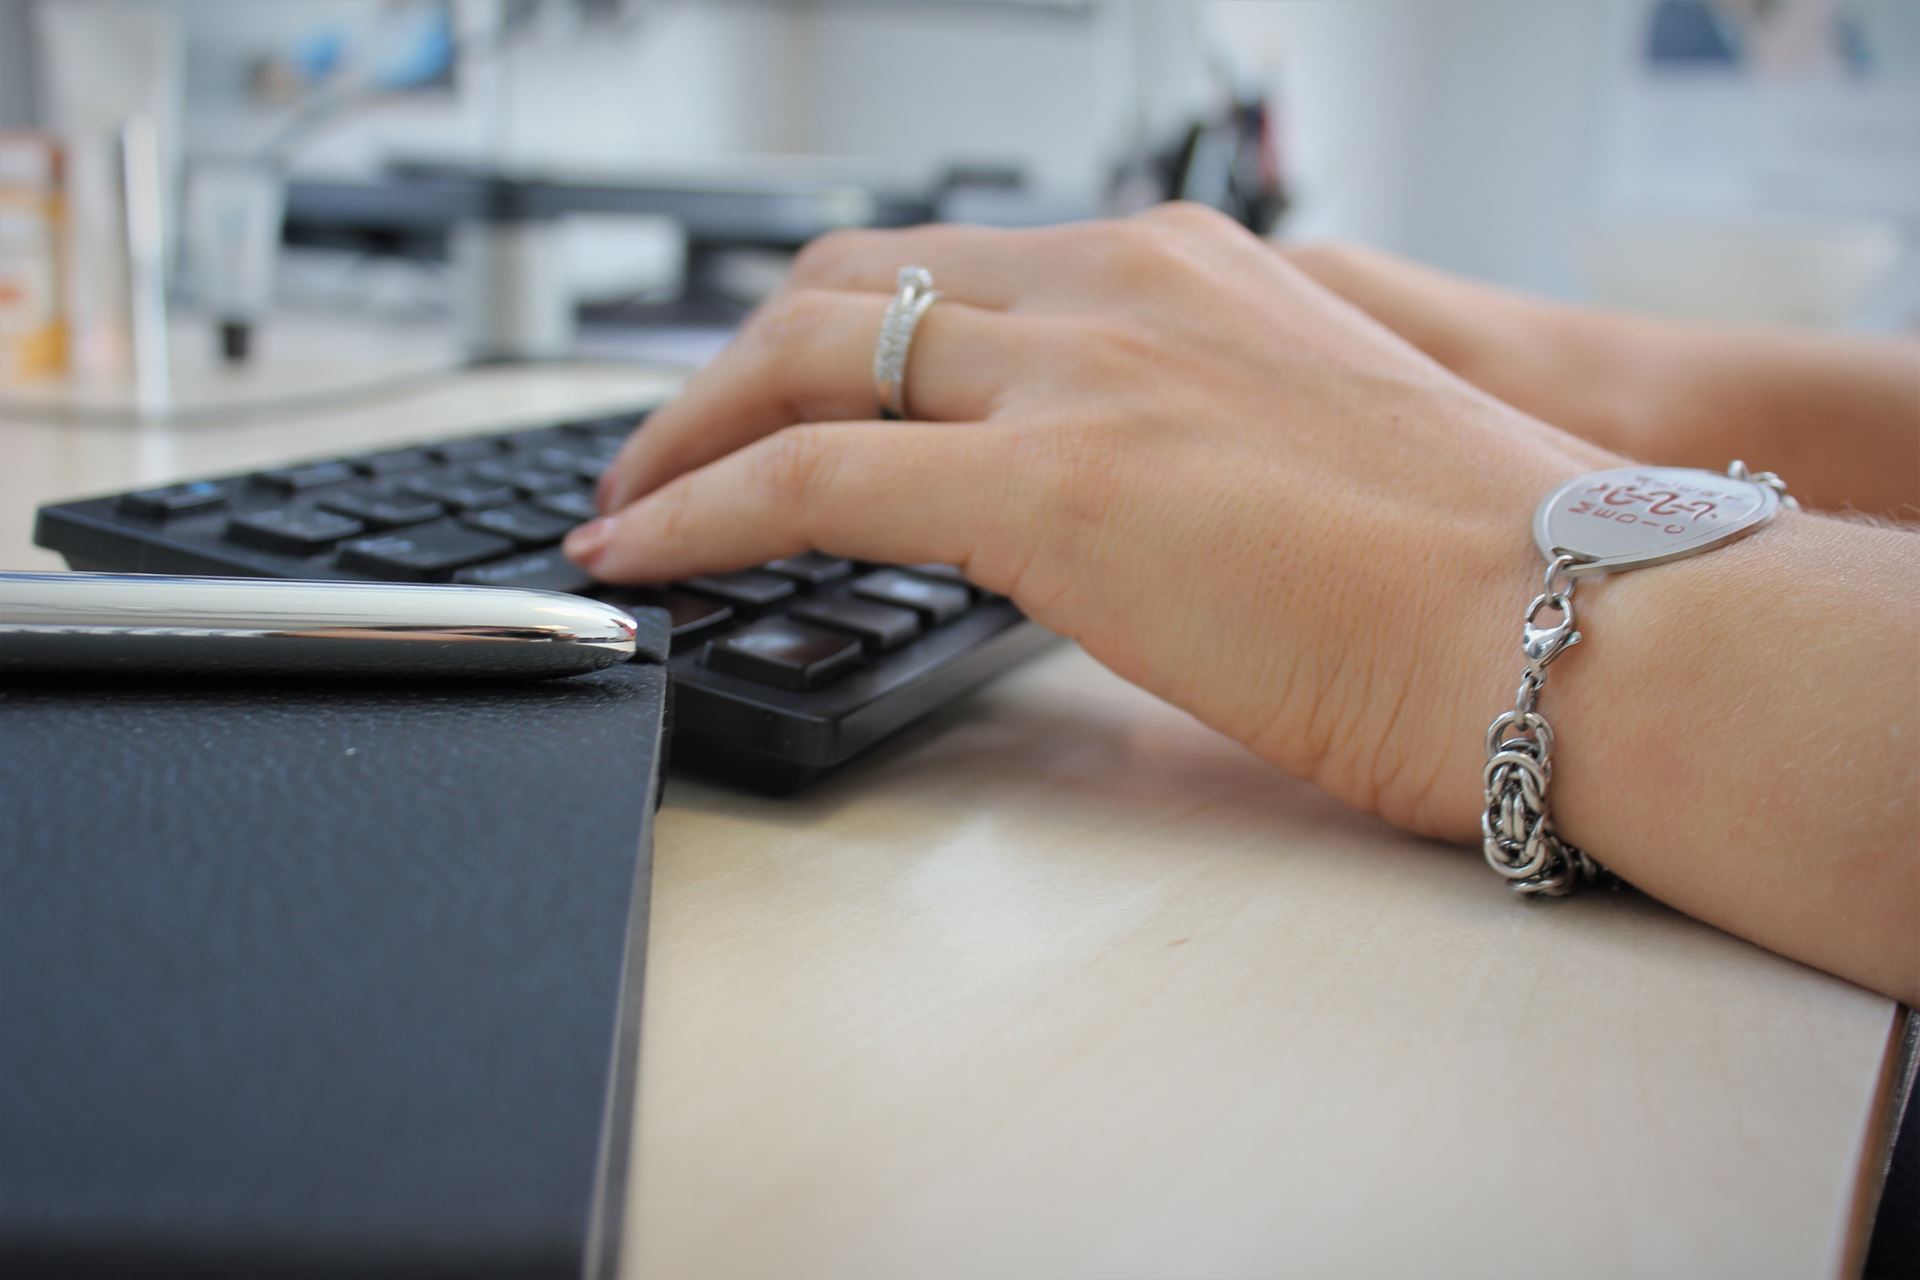 Hands typing on a keyboard. The hand nearest to us is wearing a bracelet and a ring.